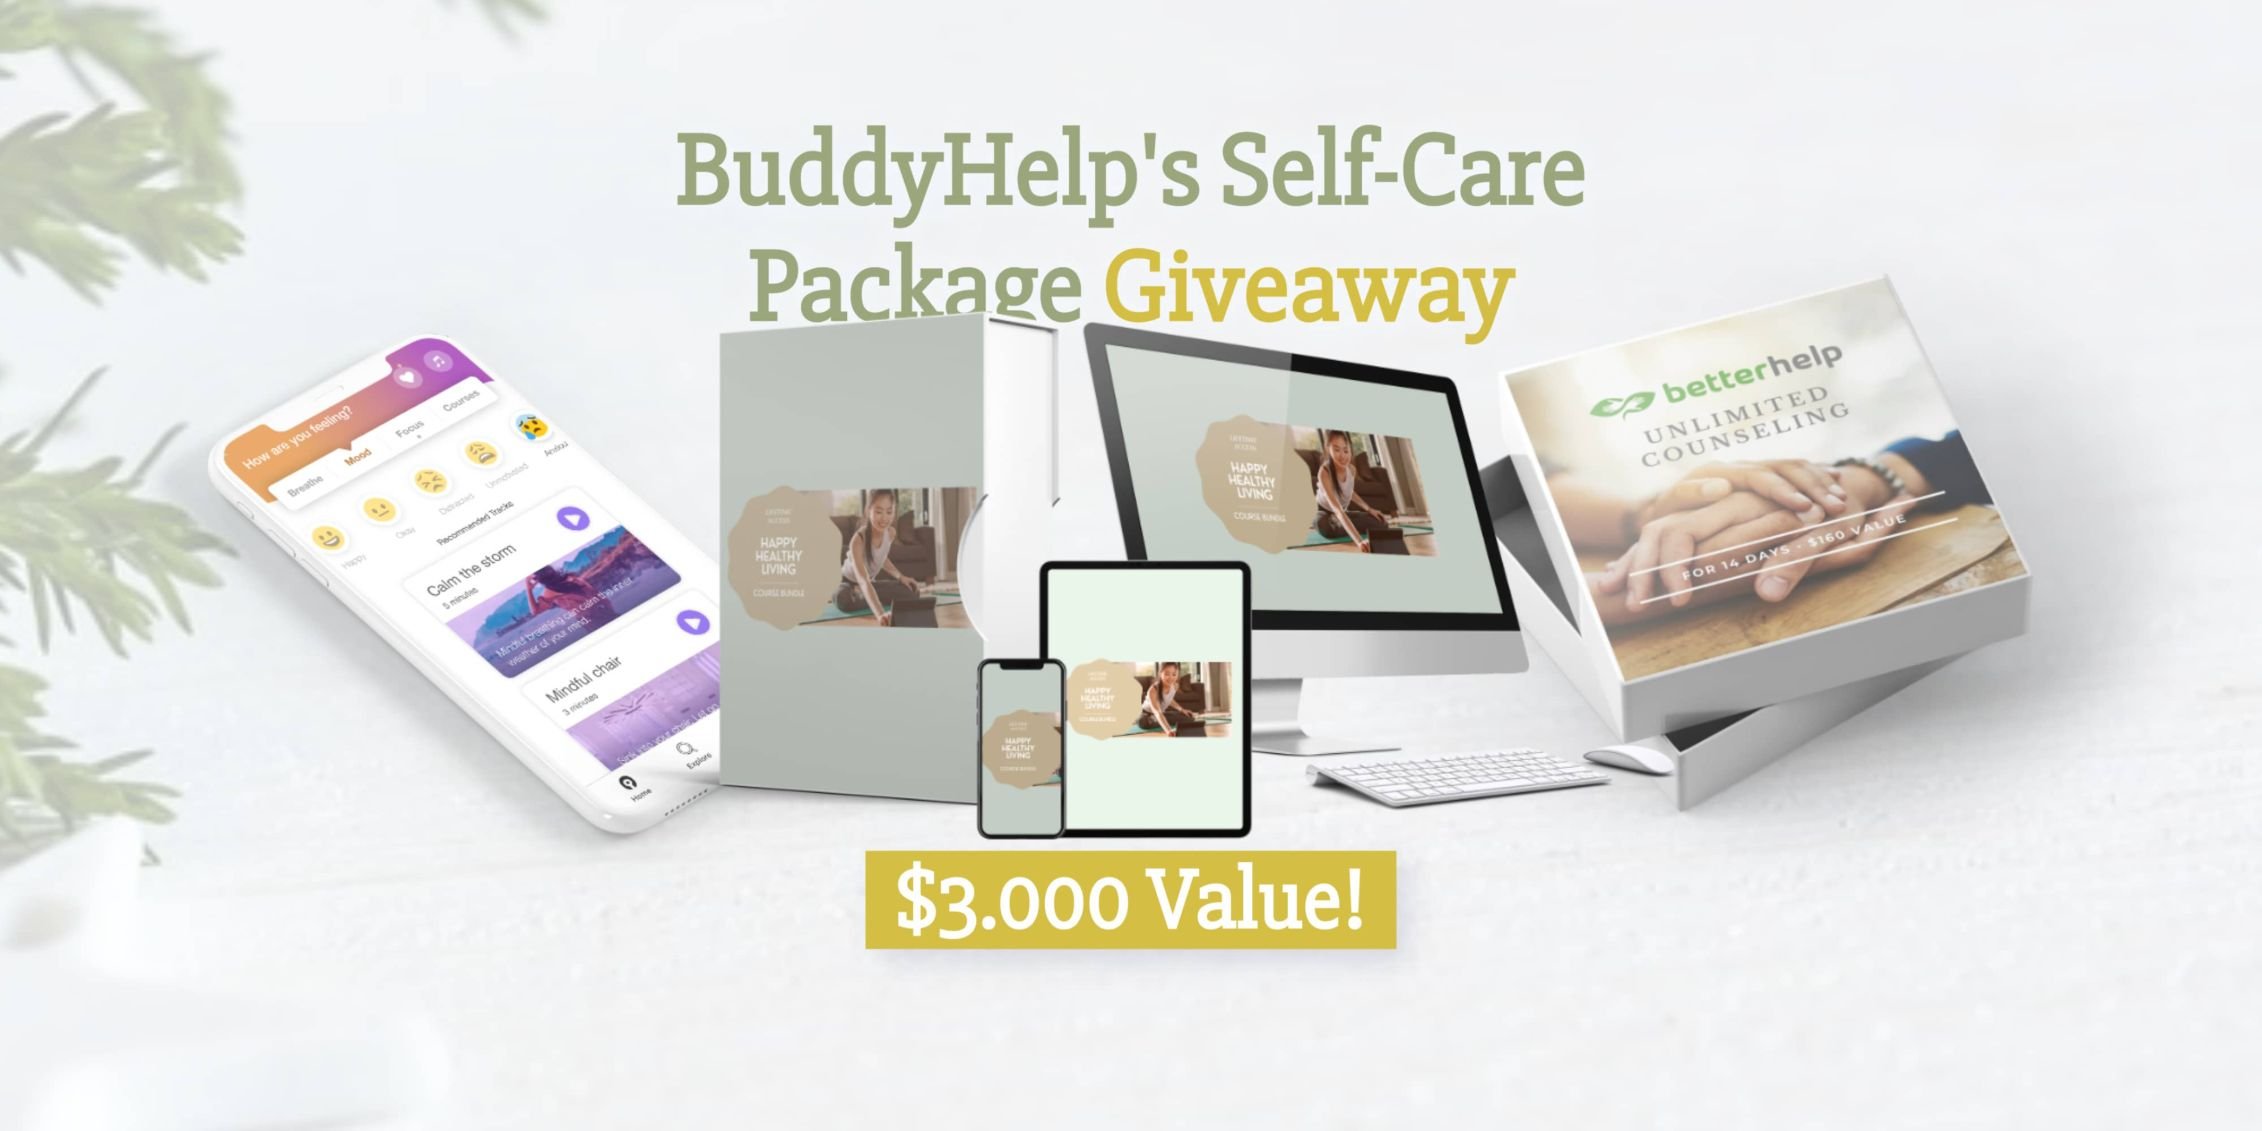 Buddyhelp self-care package giveaway